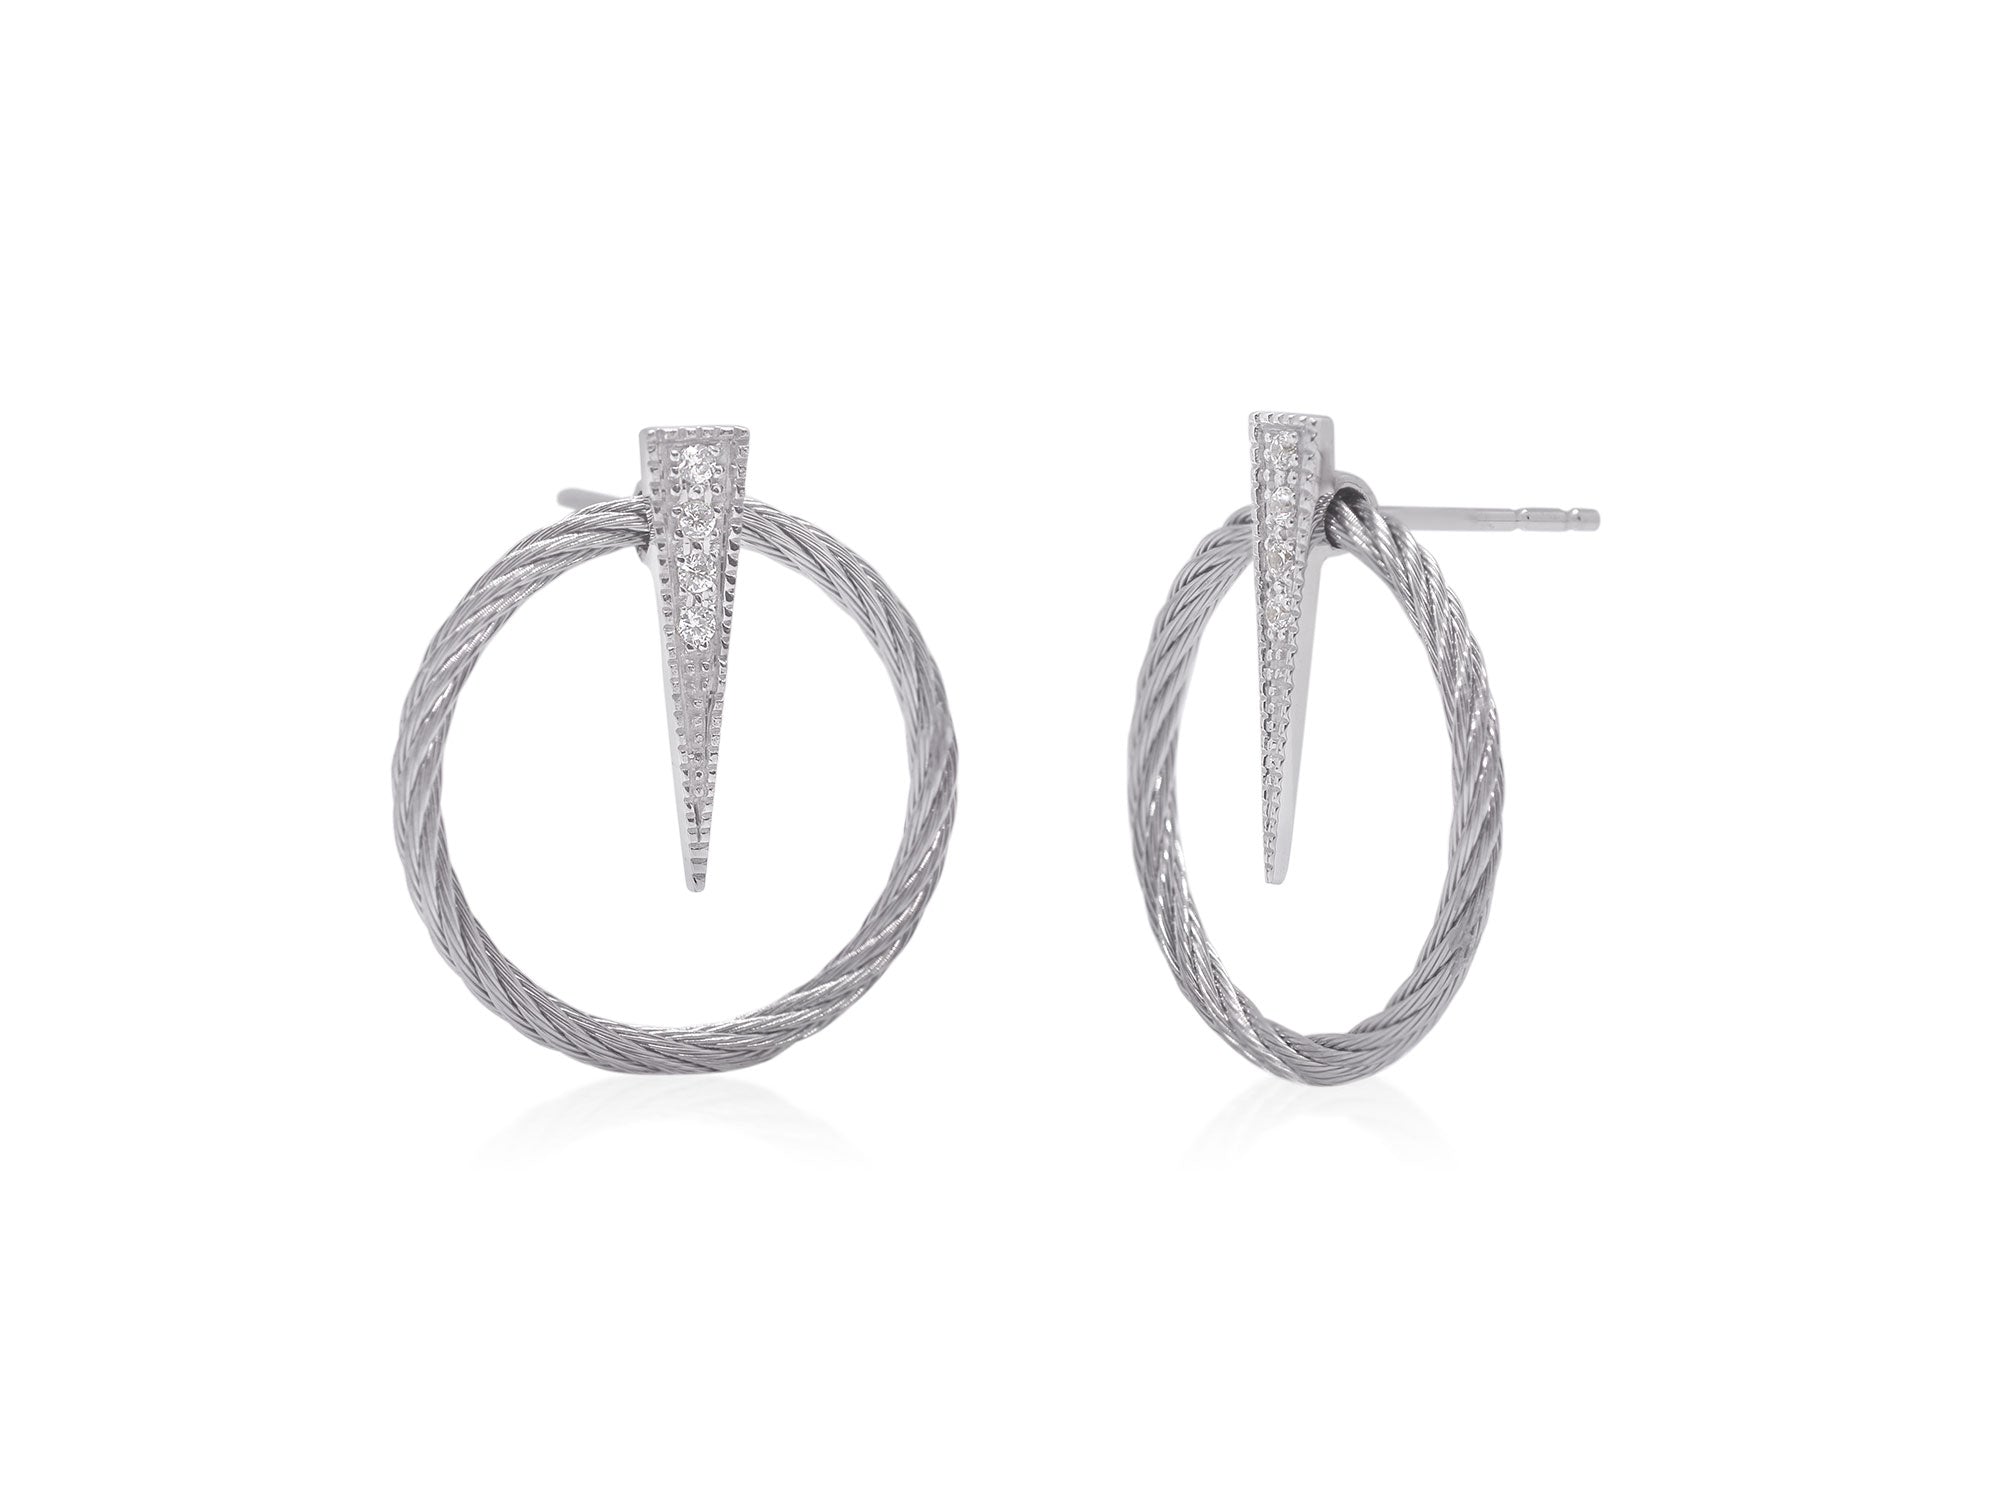 GREY CABLE FULL CIRCLE SPEAR EARRINGS WITH 18K GOLD & DIAMONDS